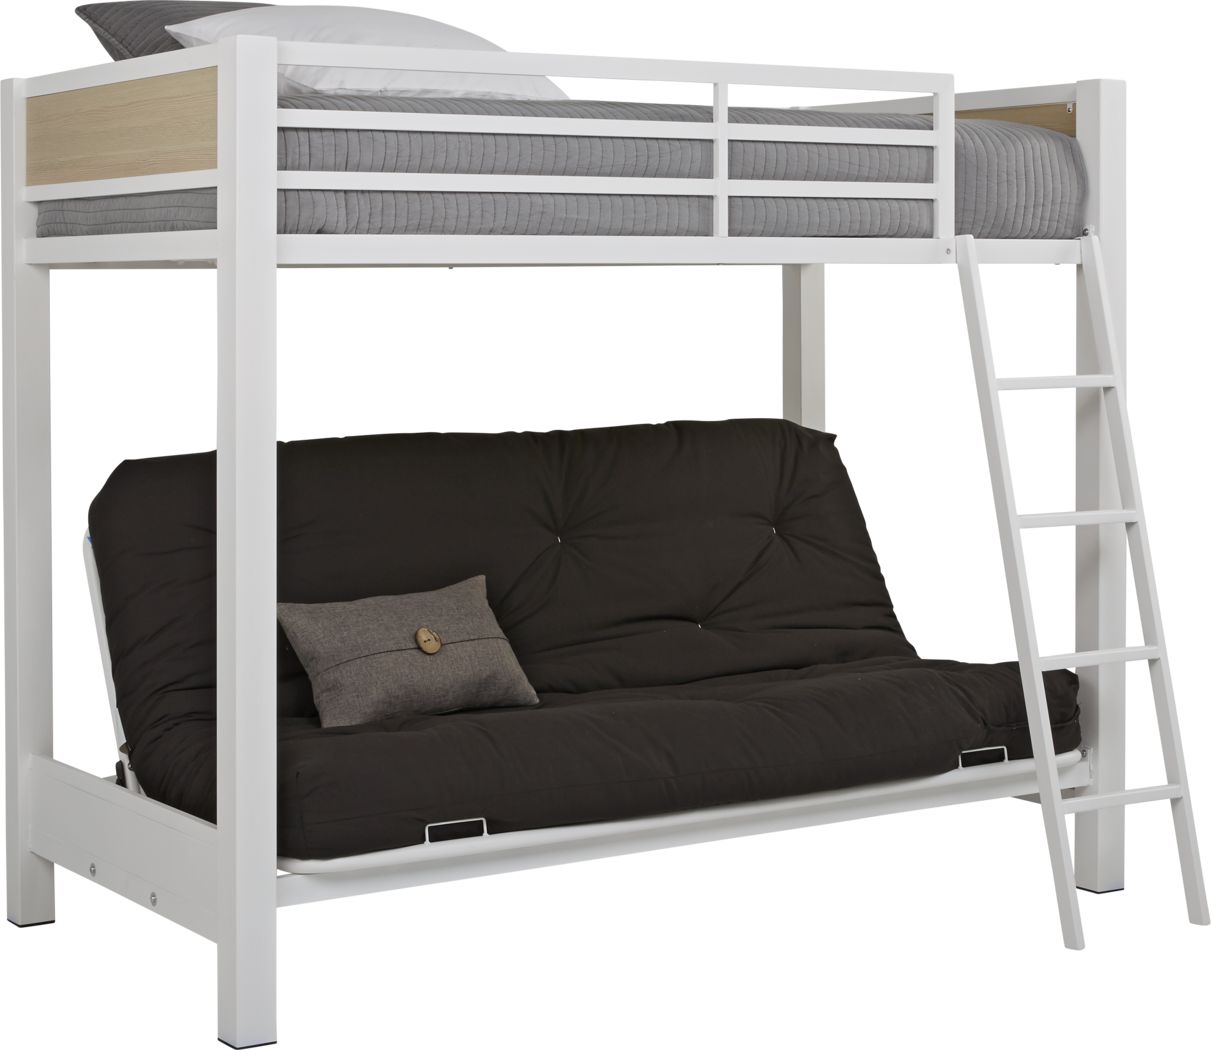 Rooms To Go Bunk Beds Carnawall Com, Bunk Beds For Kids Rooms To Go